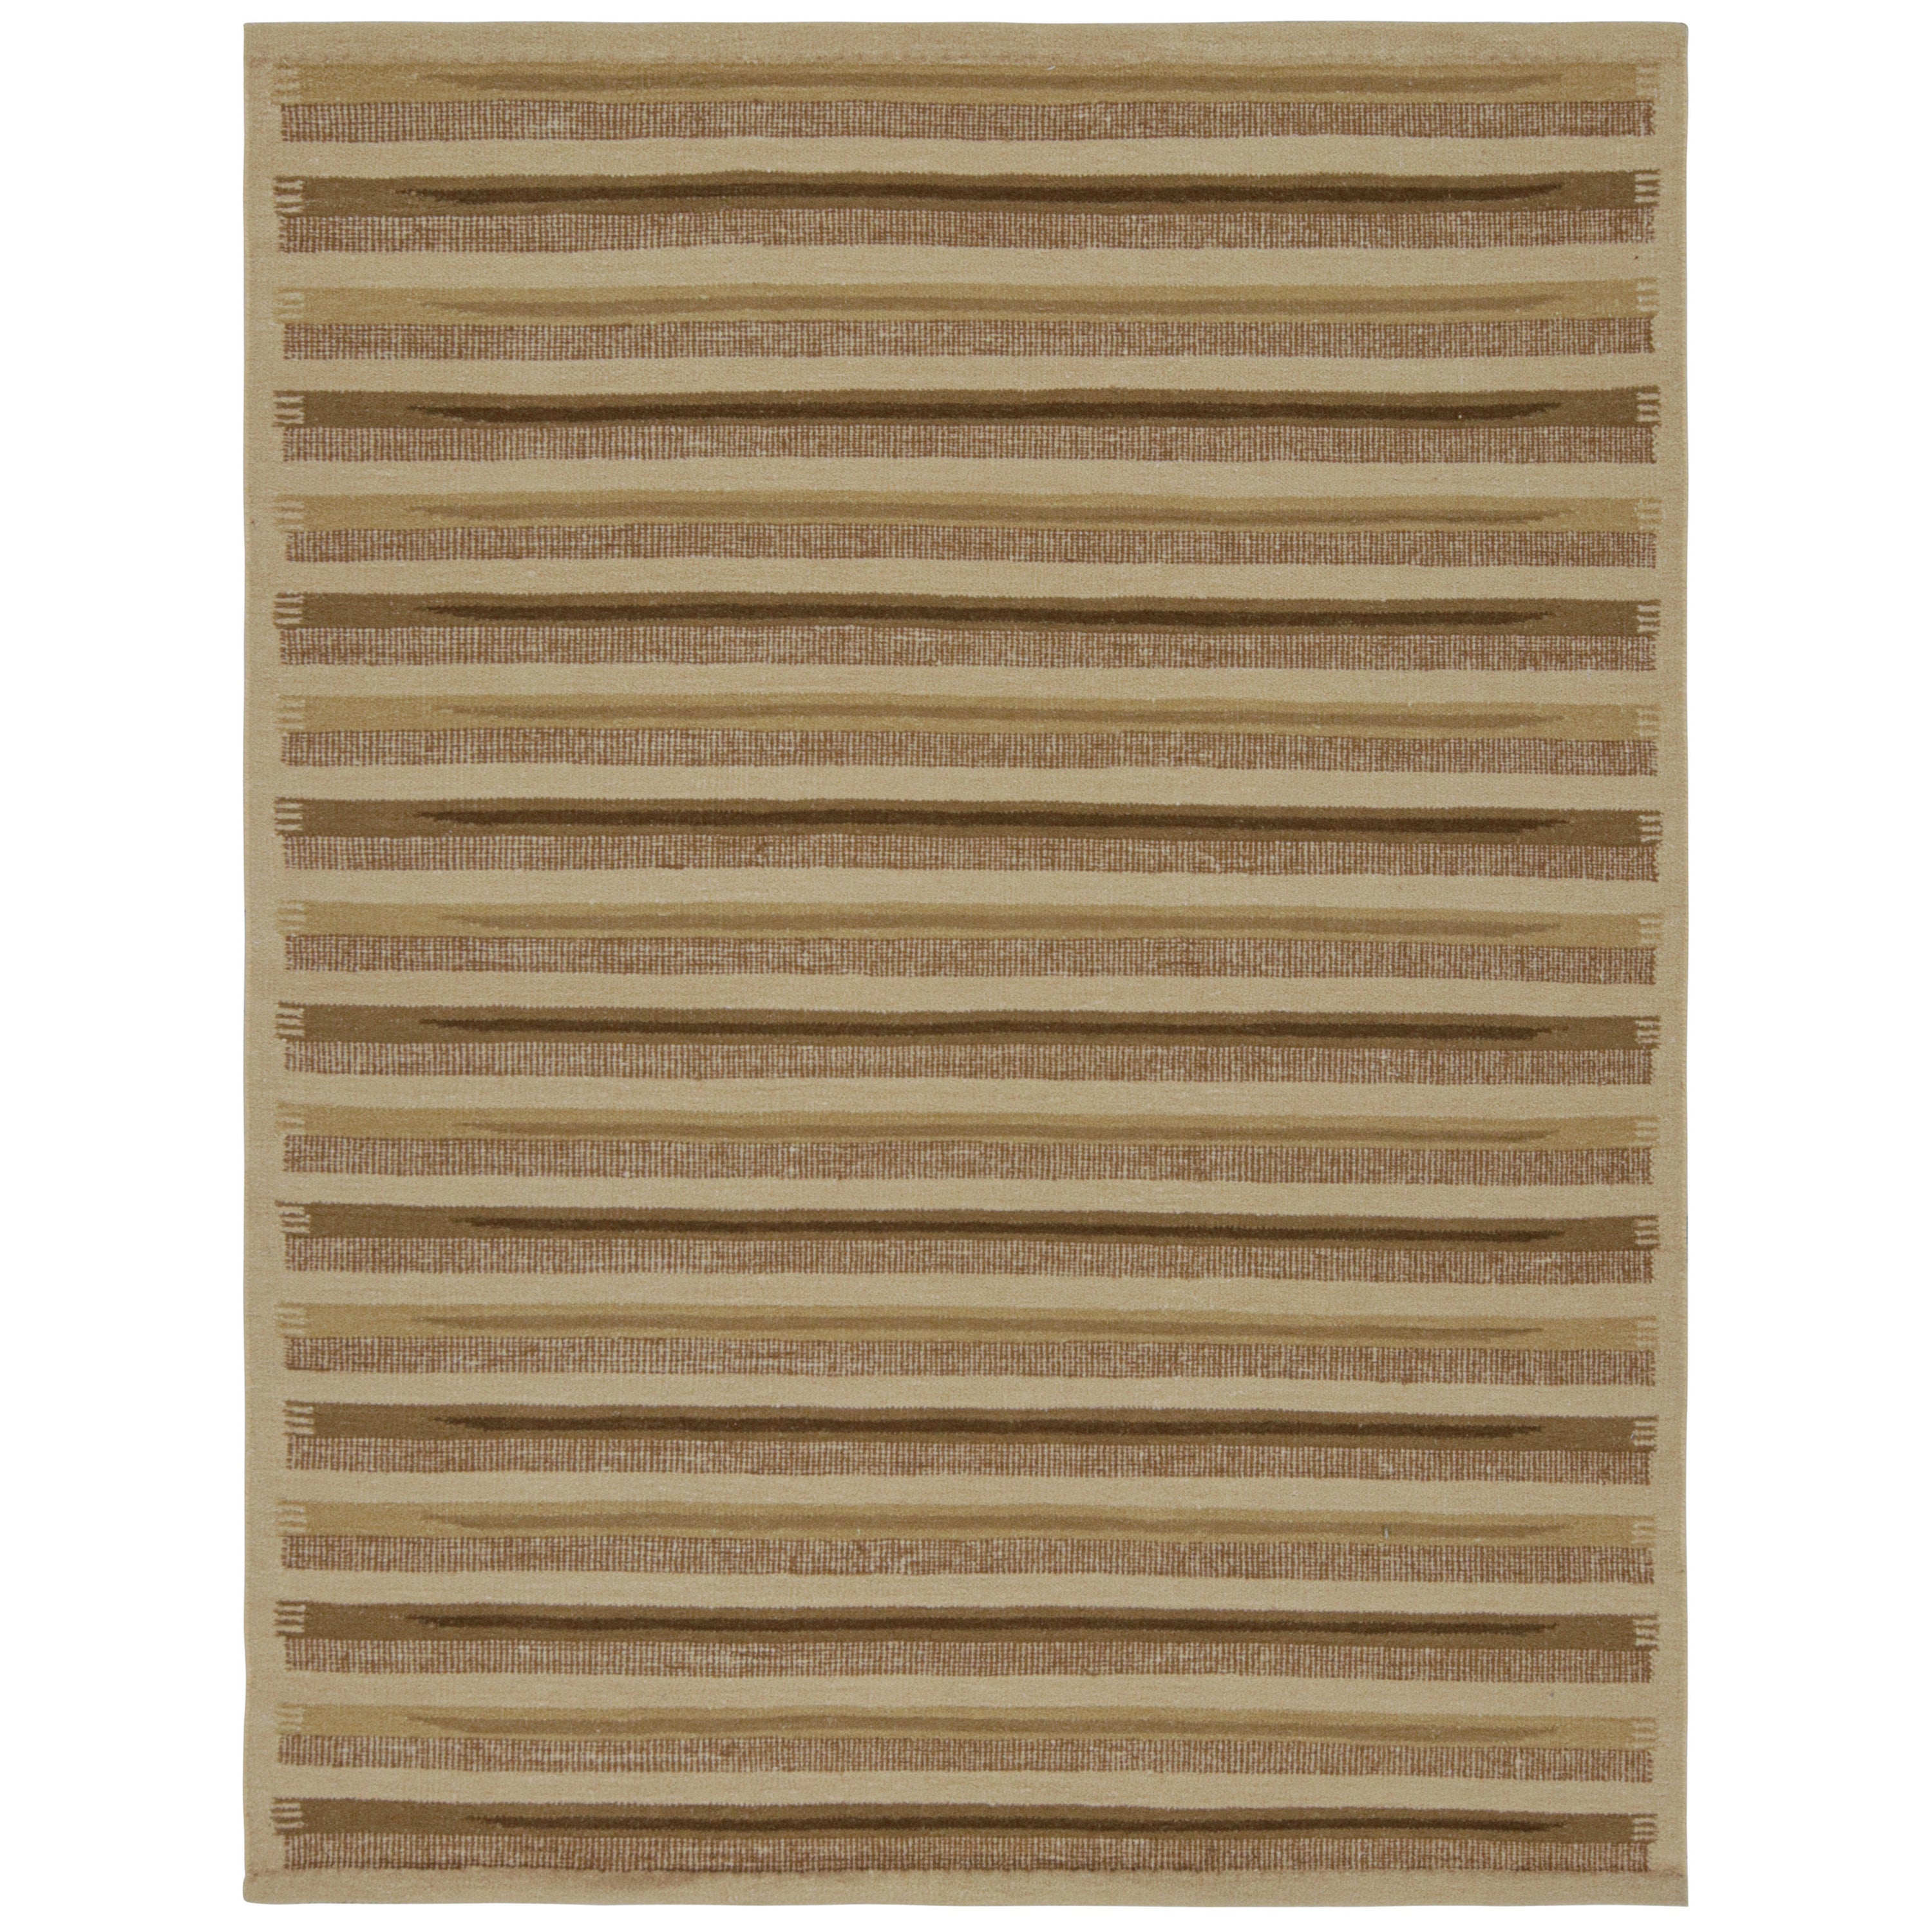 Rug & Kilim’s Scandinavian Style Rug with Chartreuse and Beige-Brown Stripes